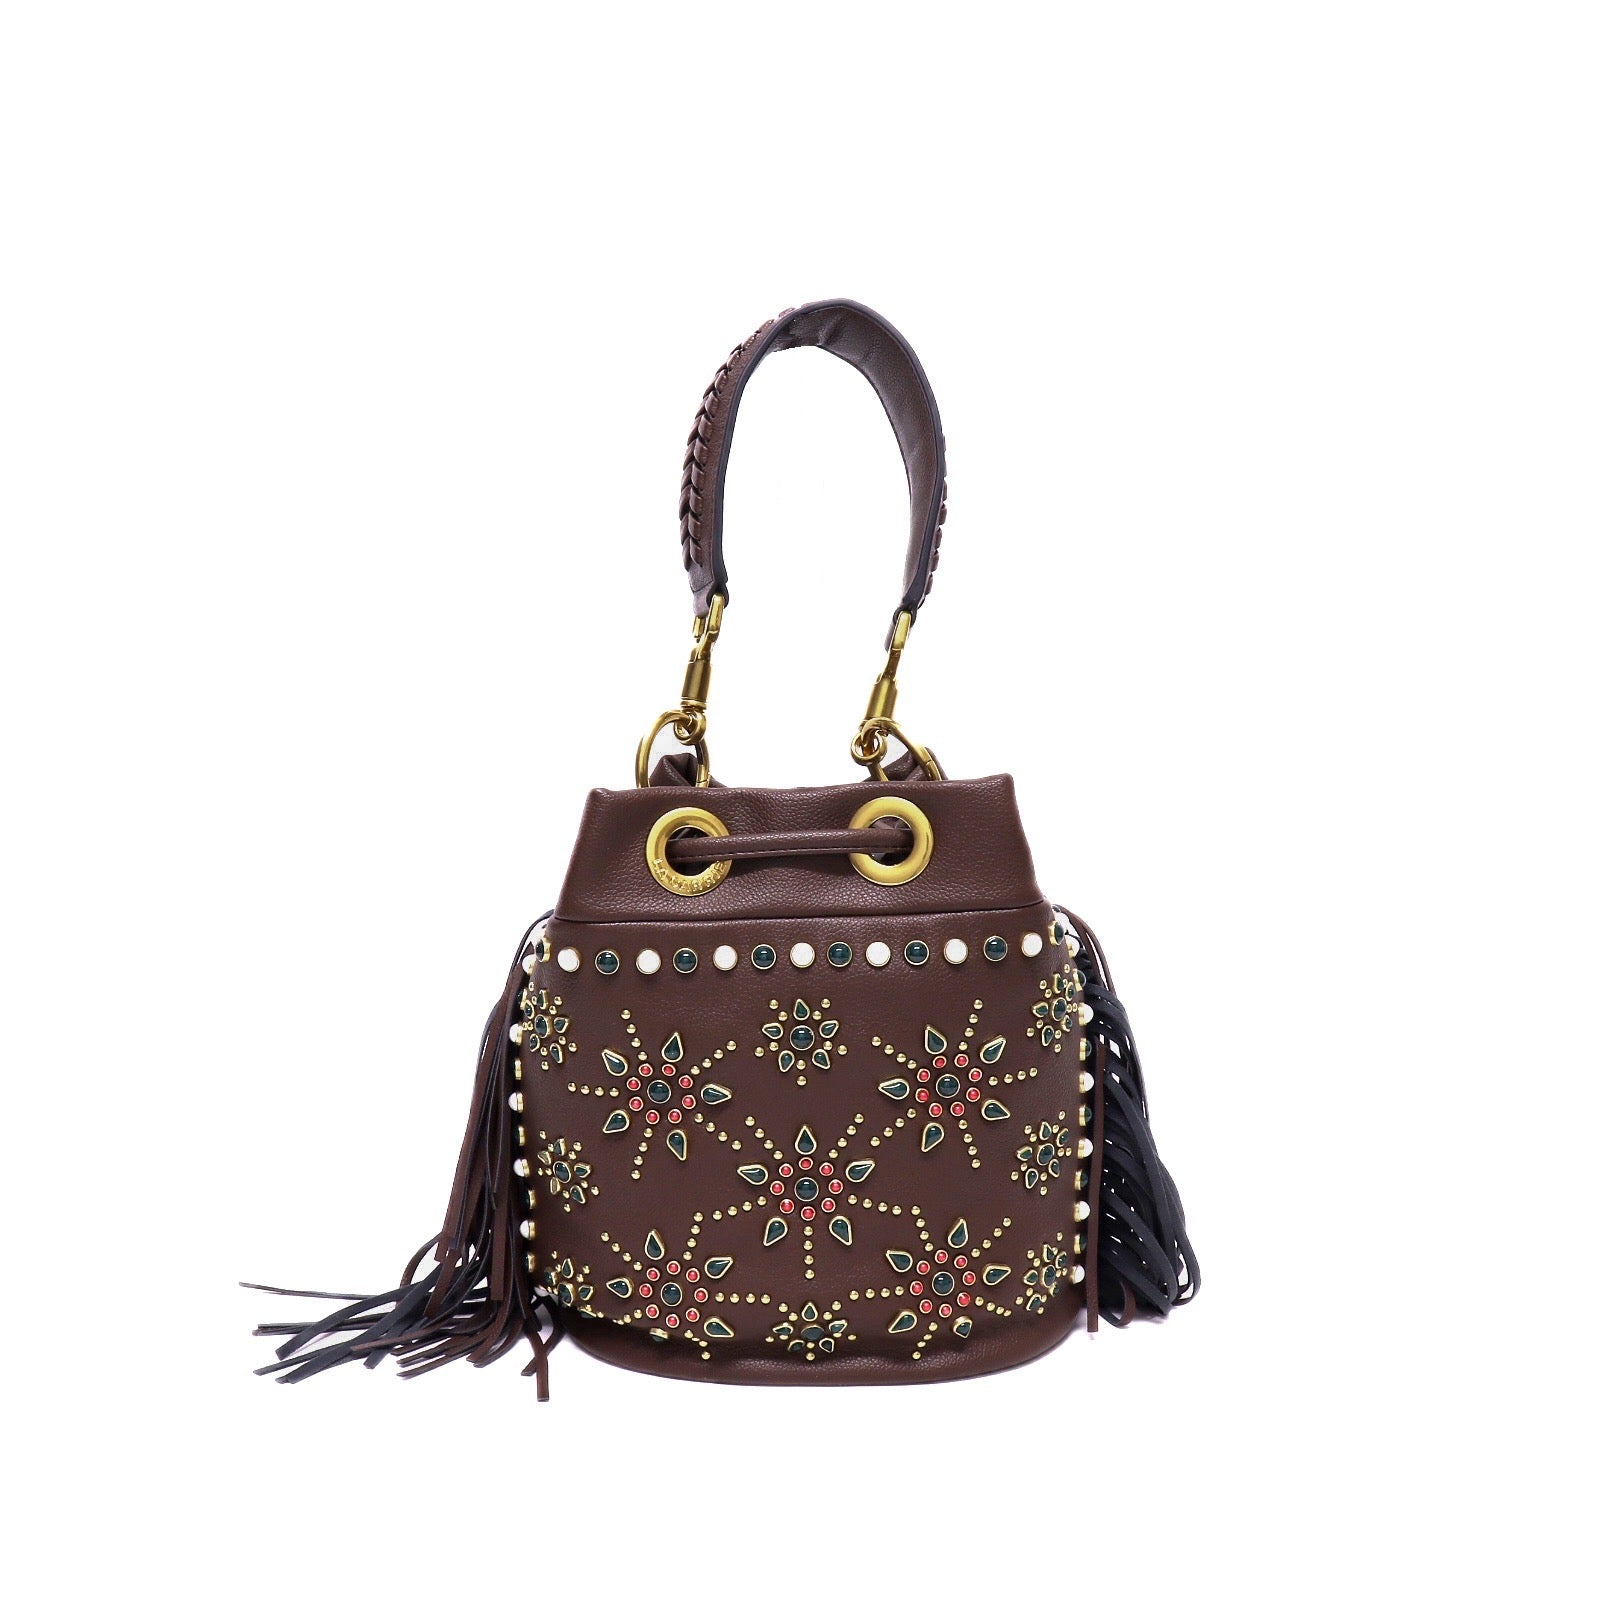 The Carrie Bag Bucket Fringes